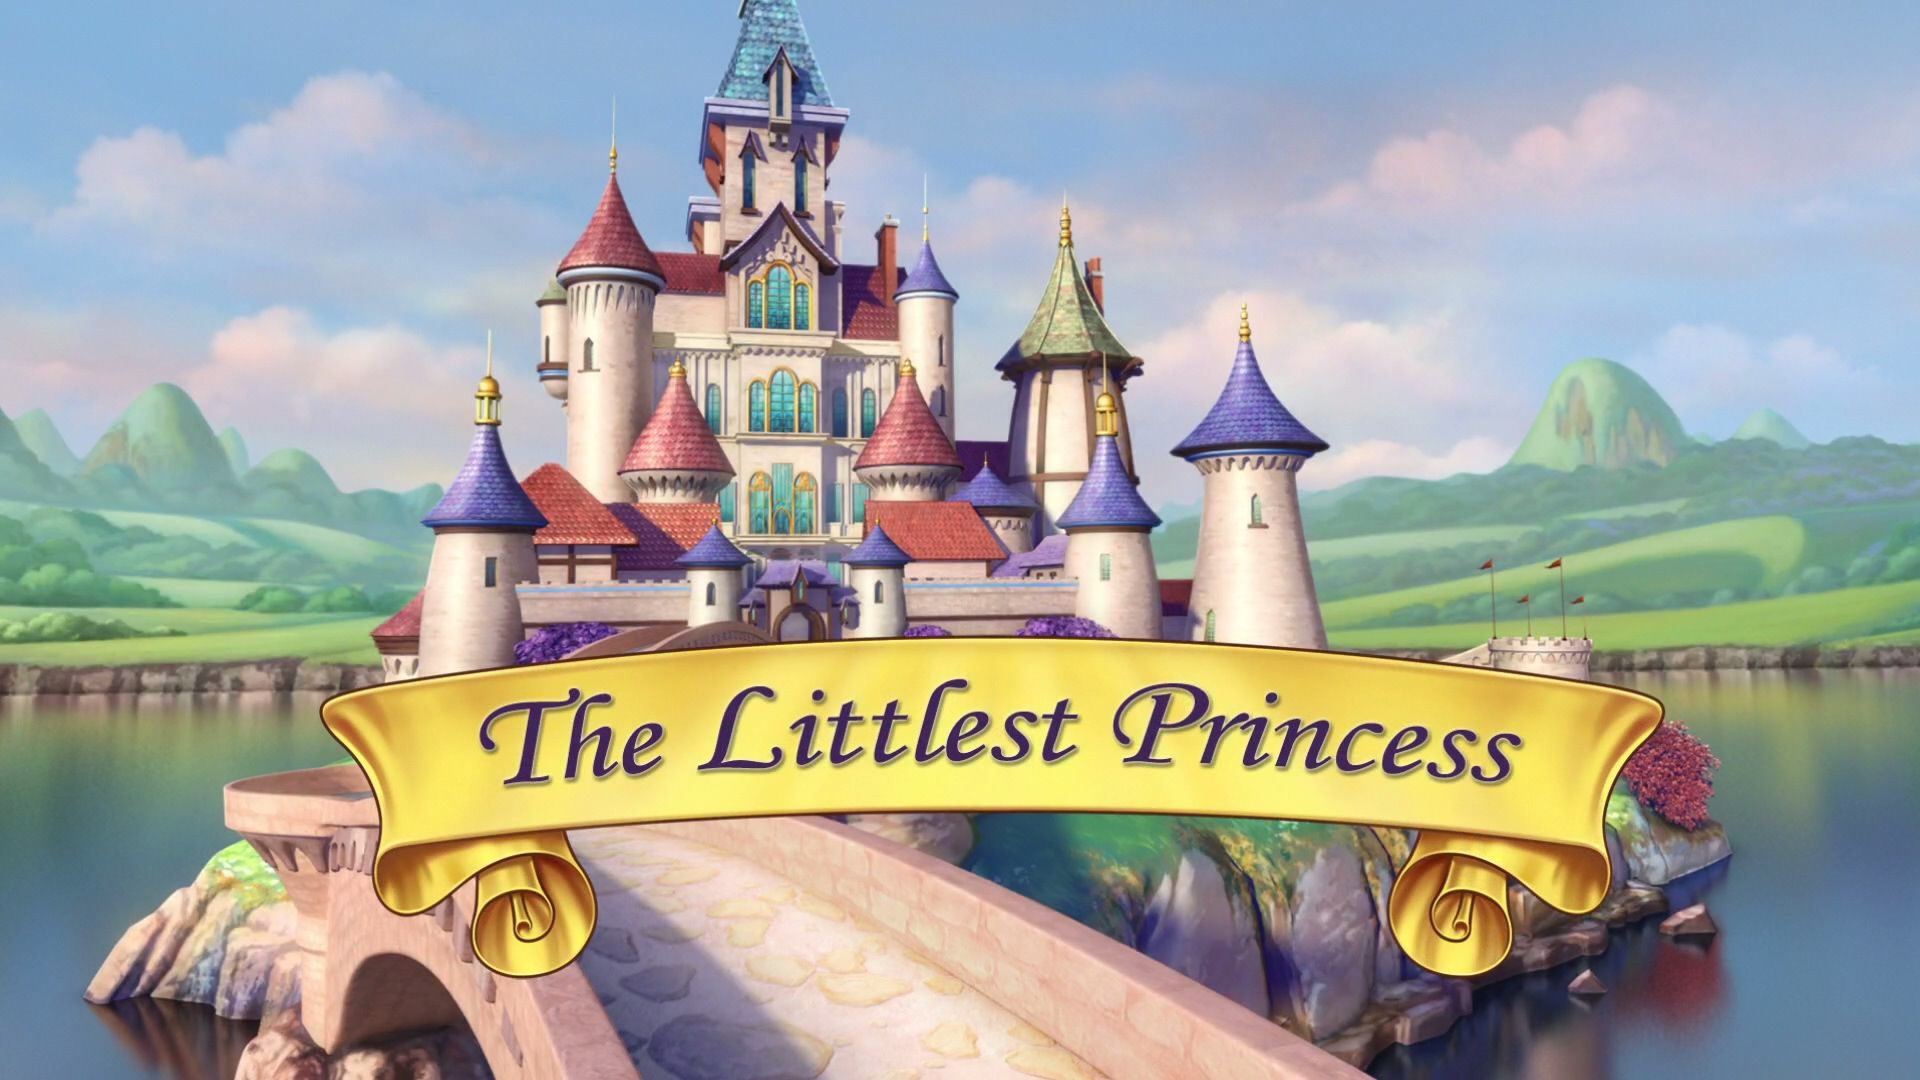 Sofia The First Wallpaper Hd - Sofia The First Hexley Hall (# 442094